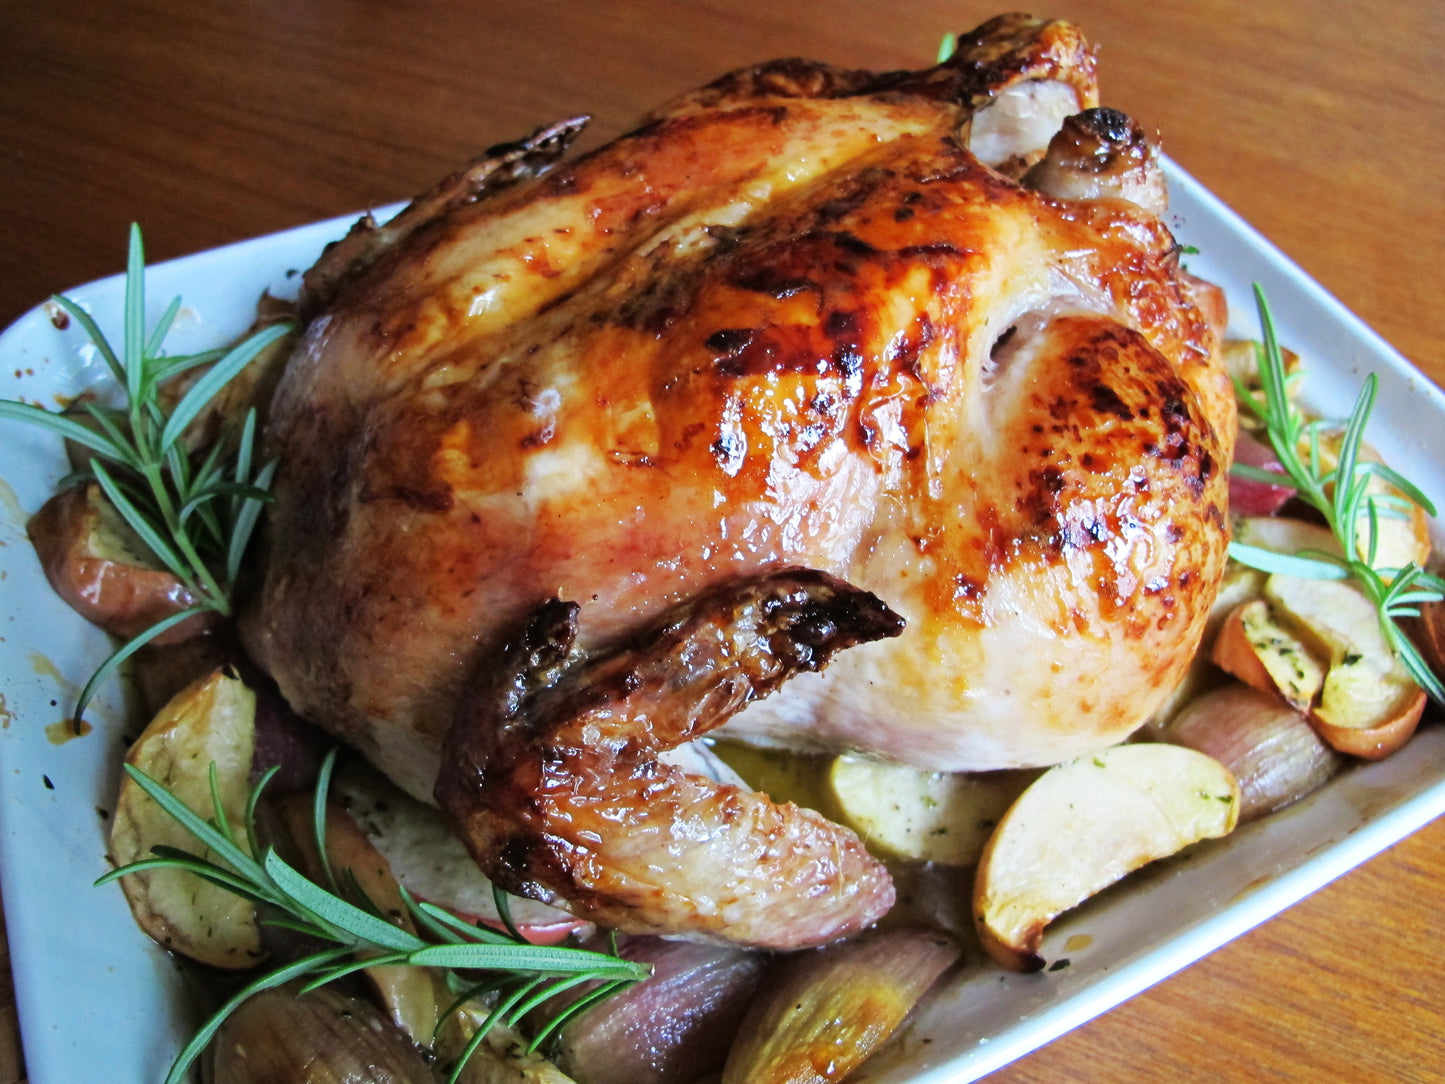 WHOLE ROASTED CHICKEN WITH APPLE LEMON STUFFING